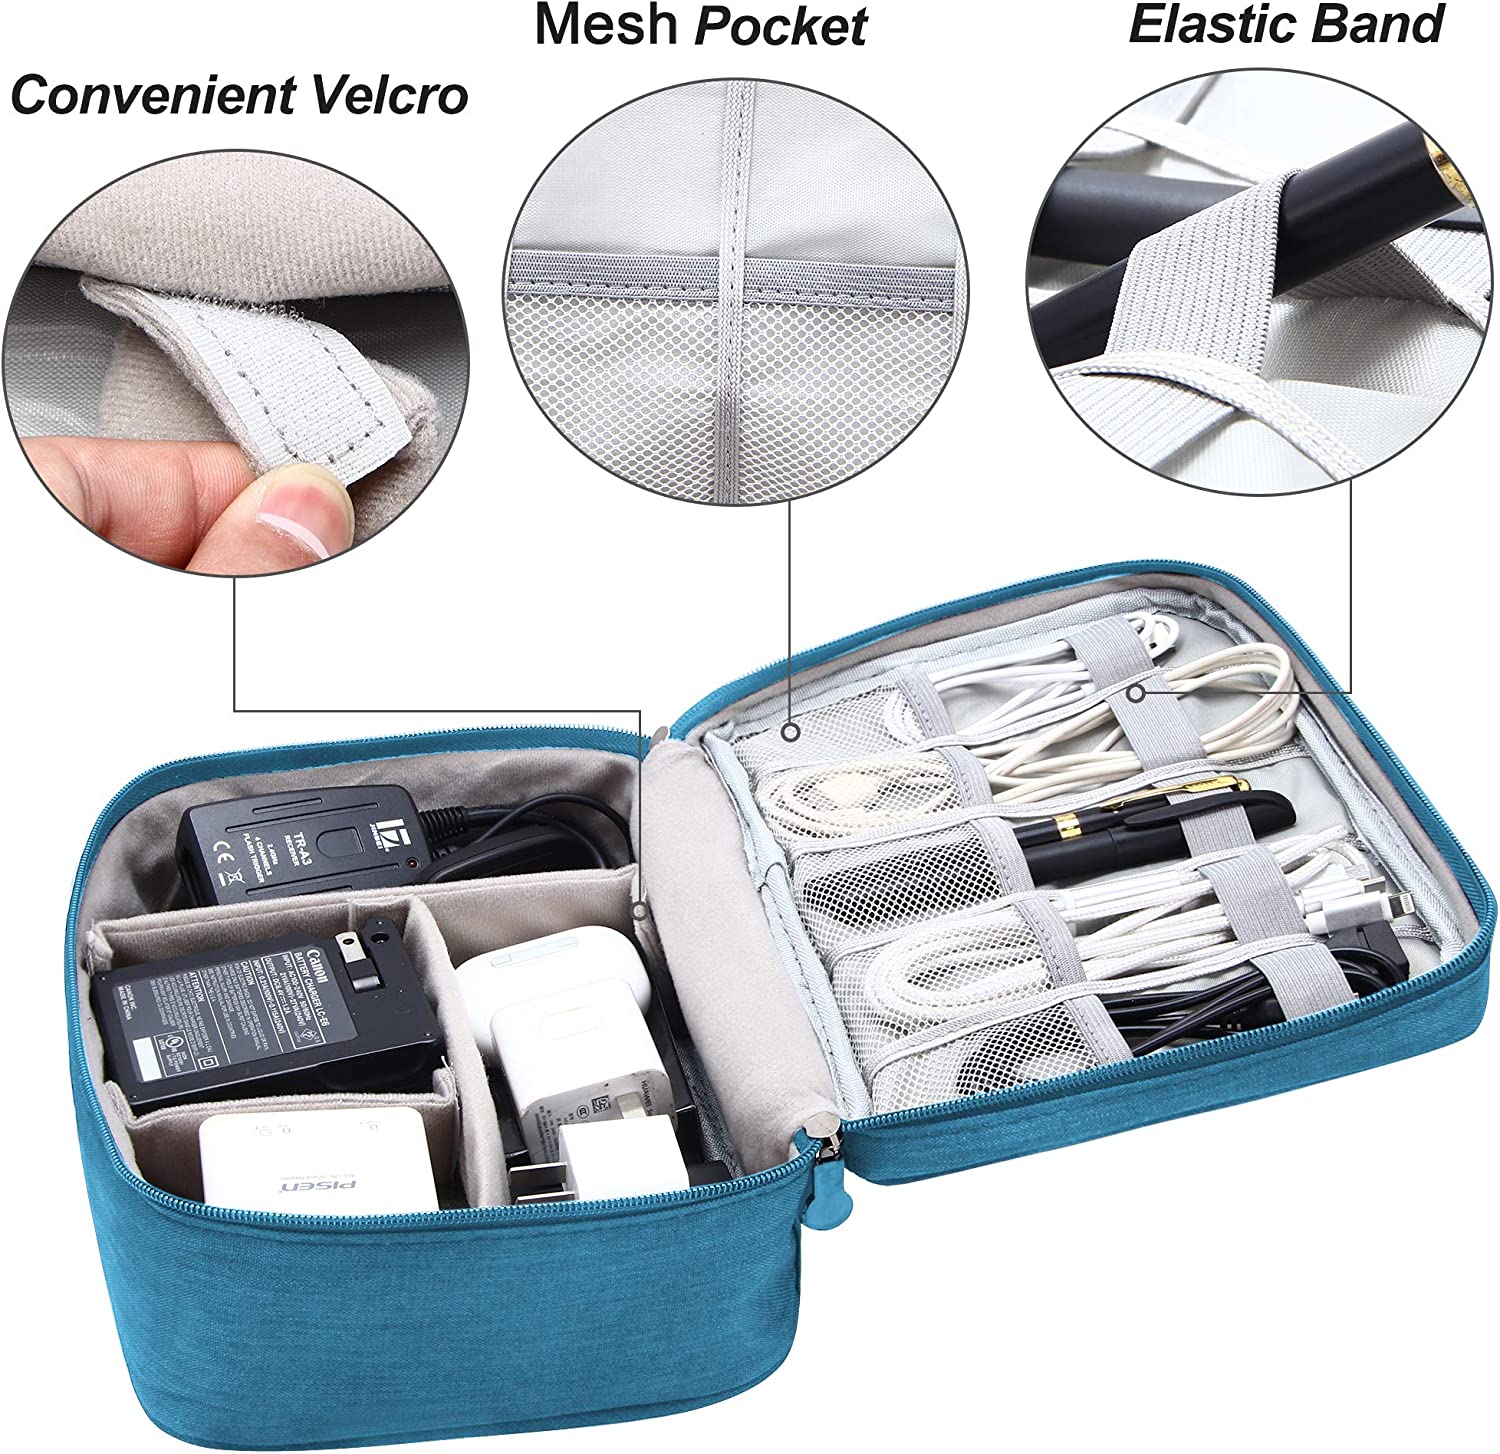 1pc 9 45 7 09 3 94Inch Electronics Organizer Travel Universal Cable Organizer Bag Waterproof Electronics Accessories Storage Cases Storage Organizer For Cable Charger Phone USB SD Card Hard Drives Power Bank Cords